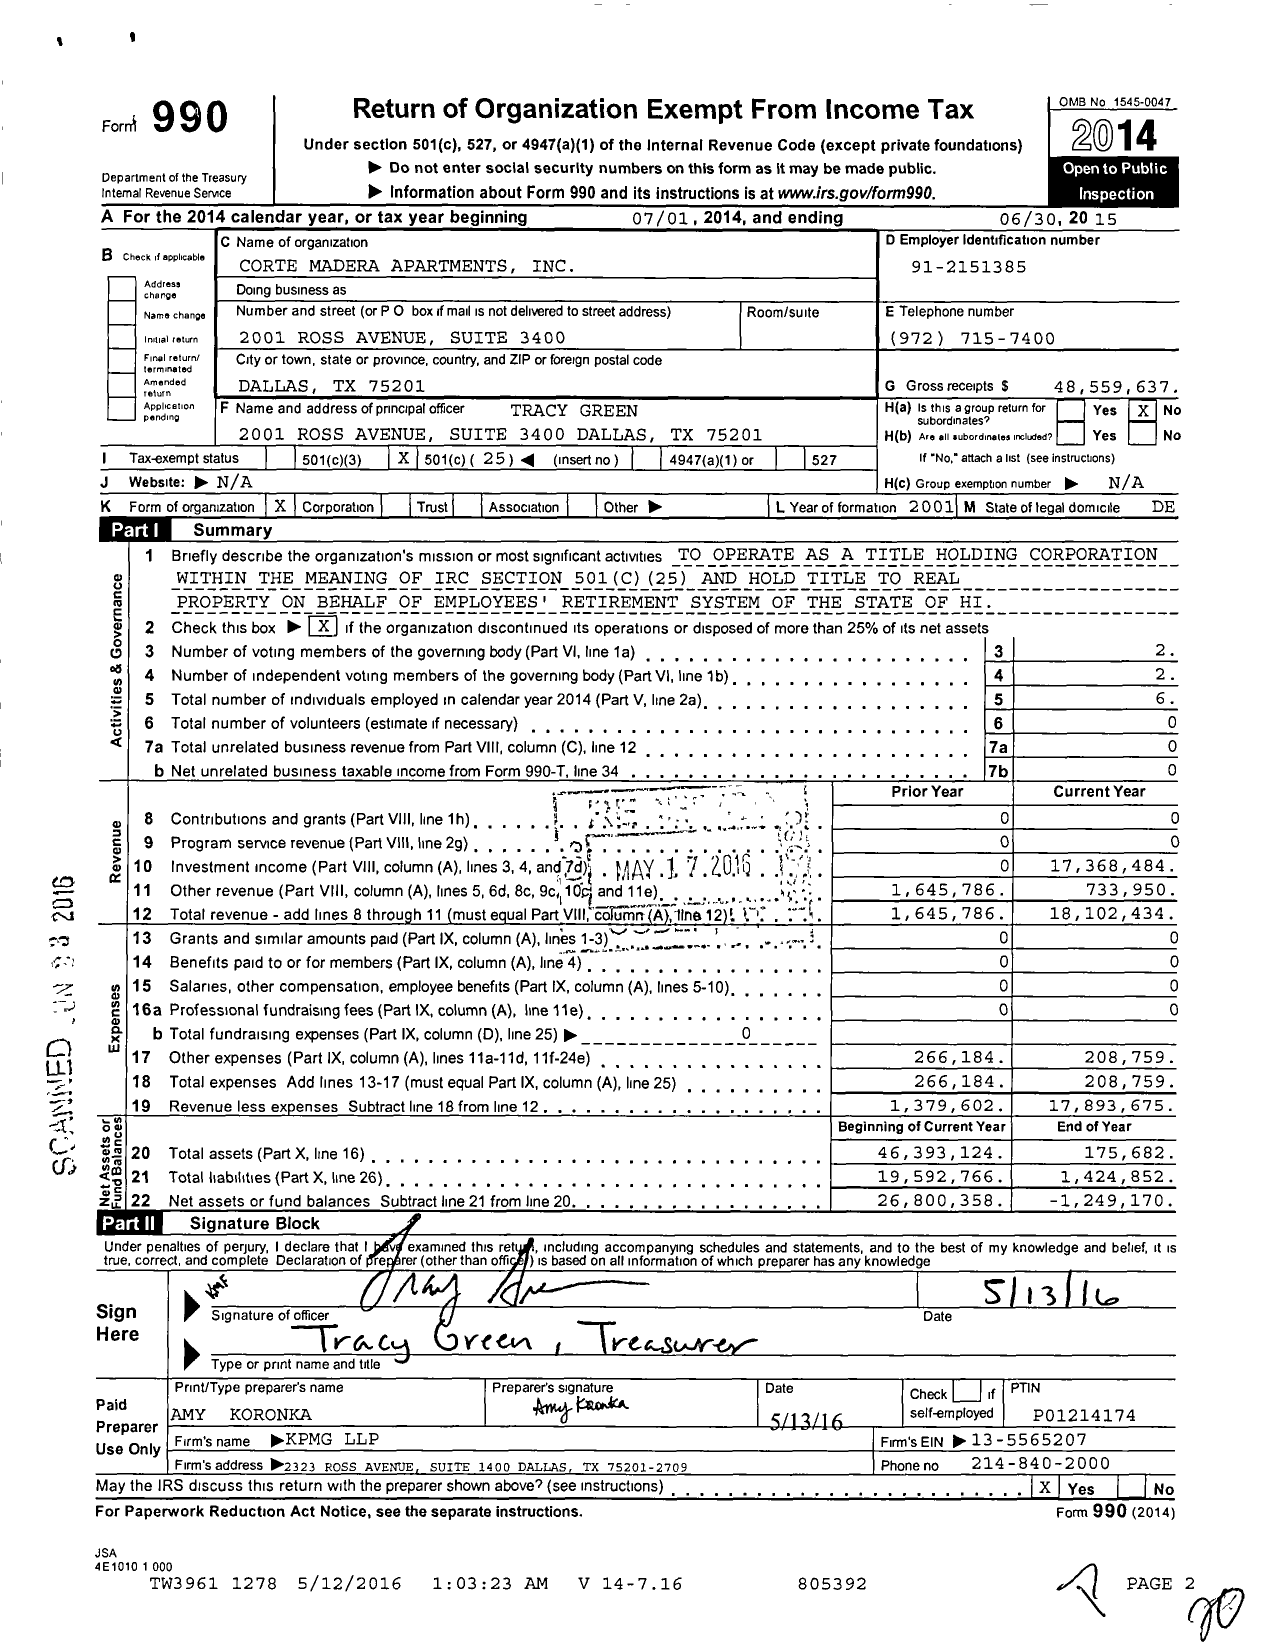 Image of first page of 2014 Form 990O for Corte Madera Apartments